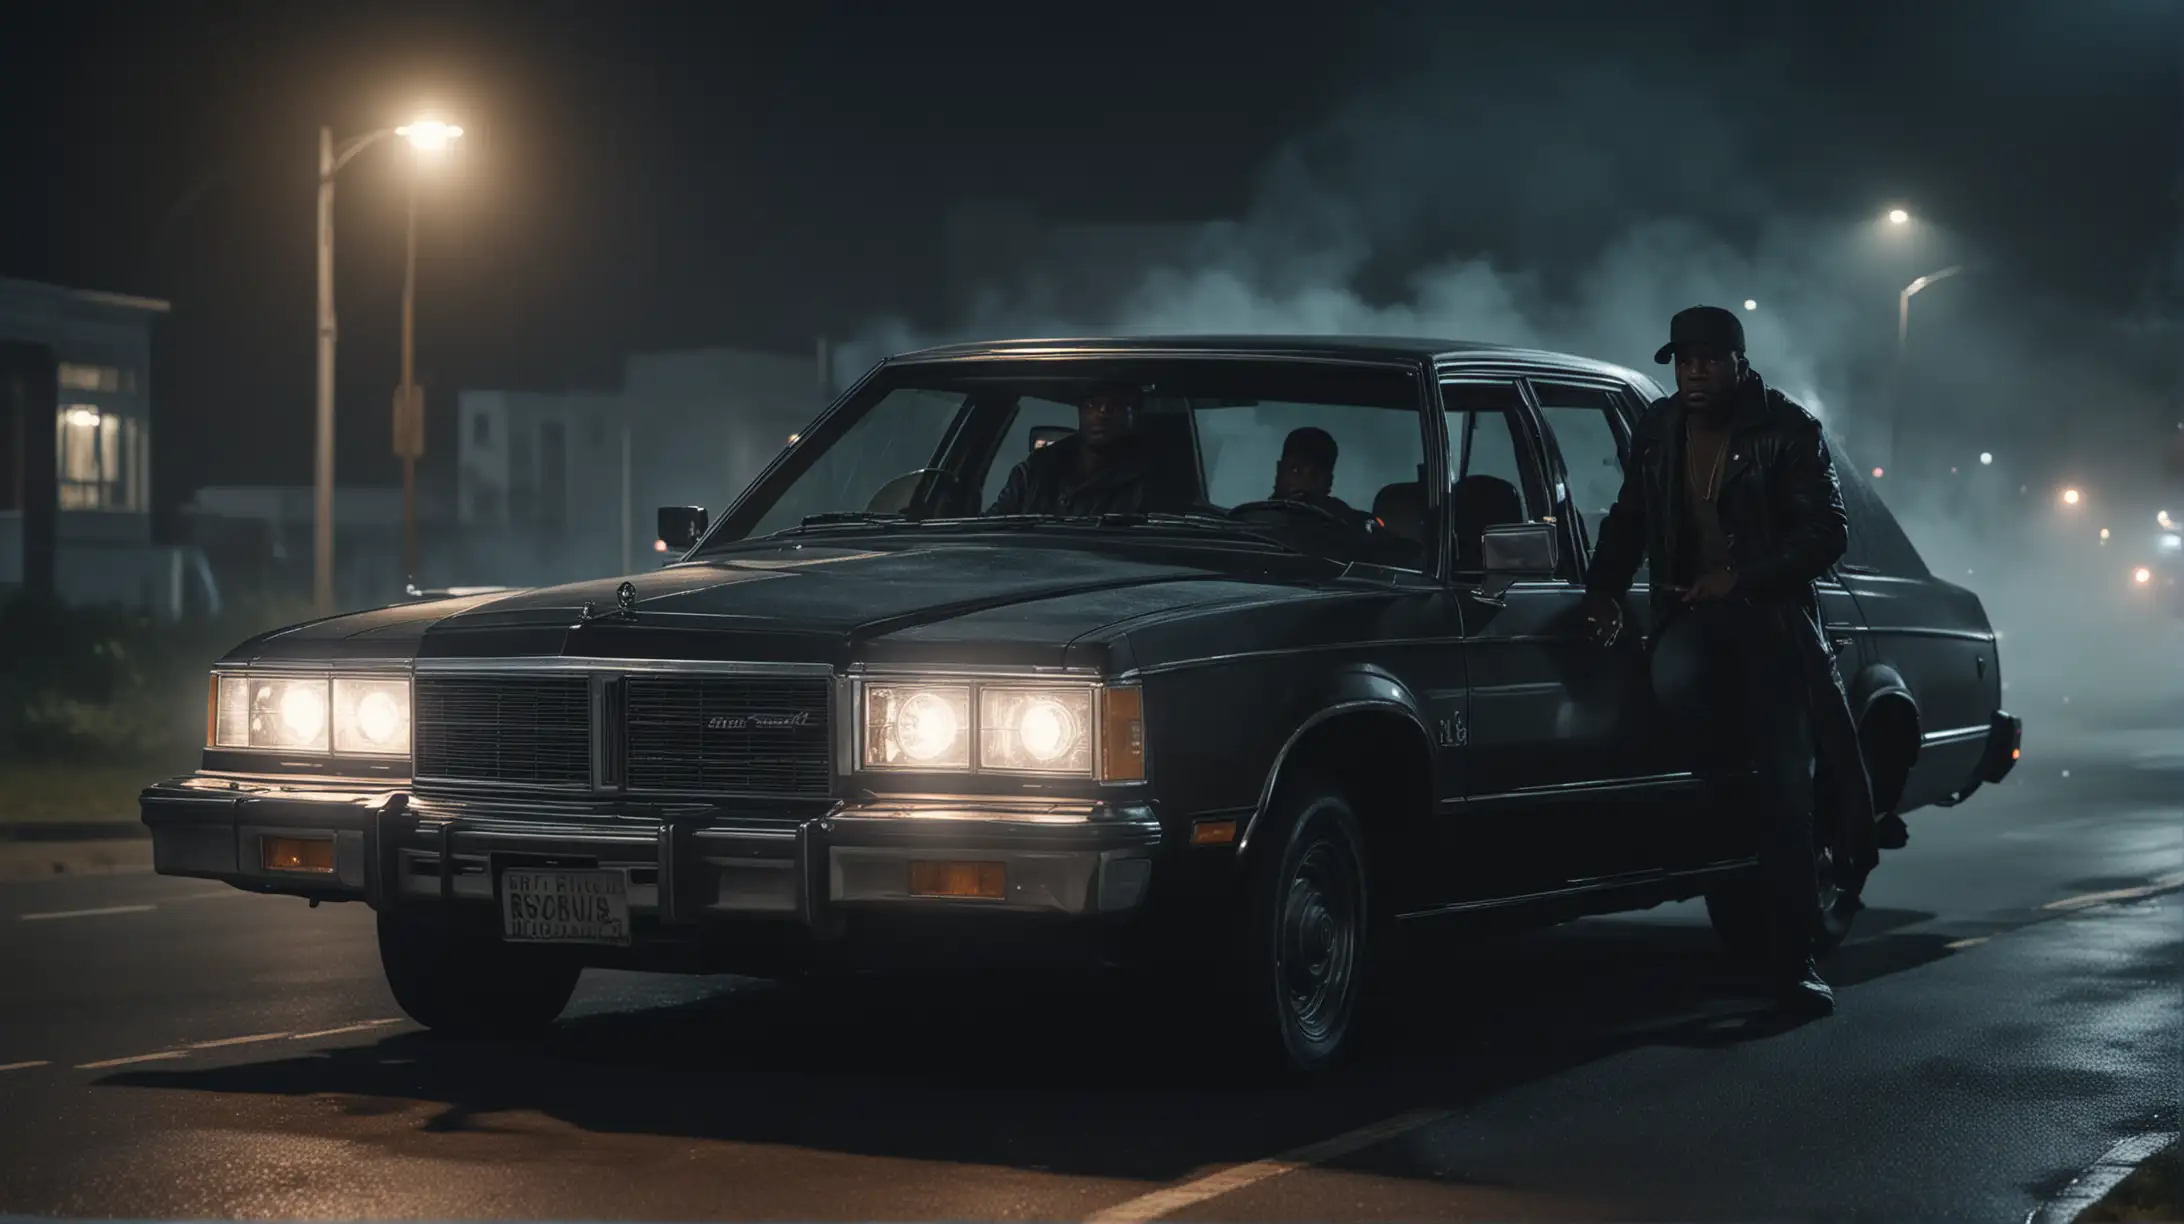 Generate a cinematic, realistic image of two black henchmen riding in an 80s sedan. Make it the middle of the night and show them  from the inside of the car